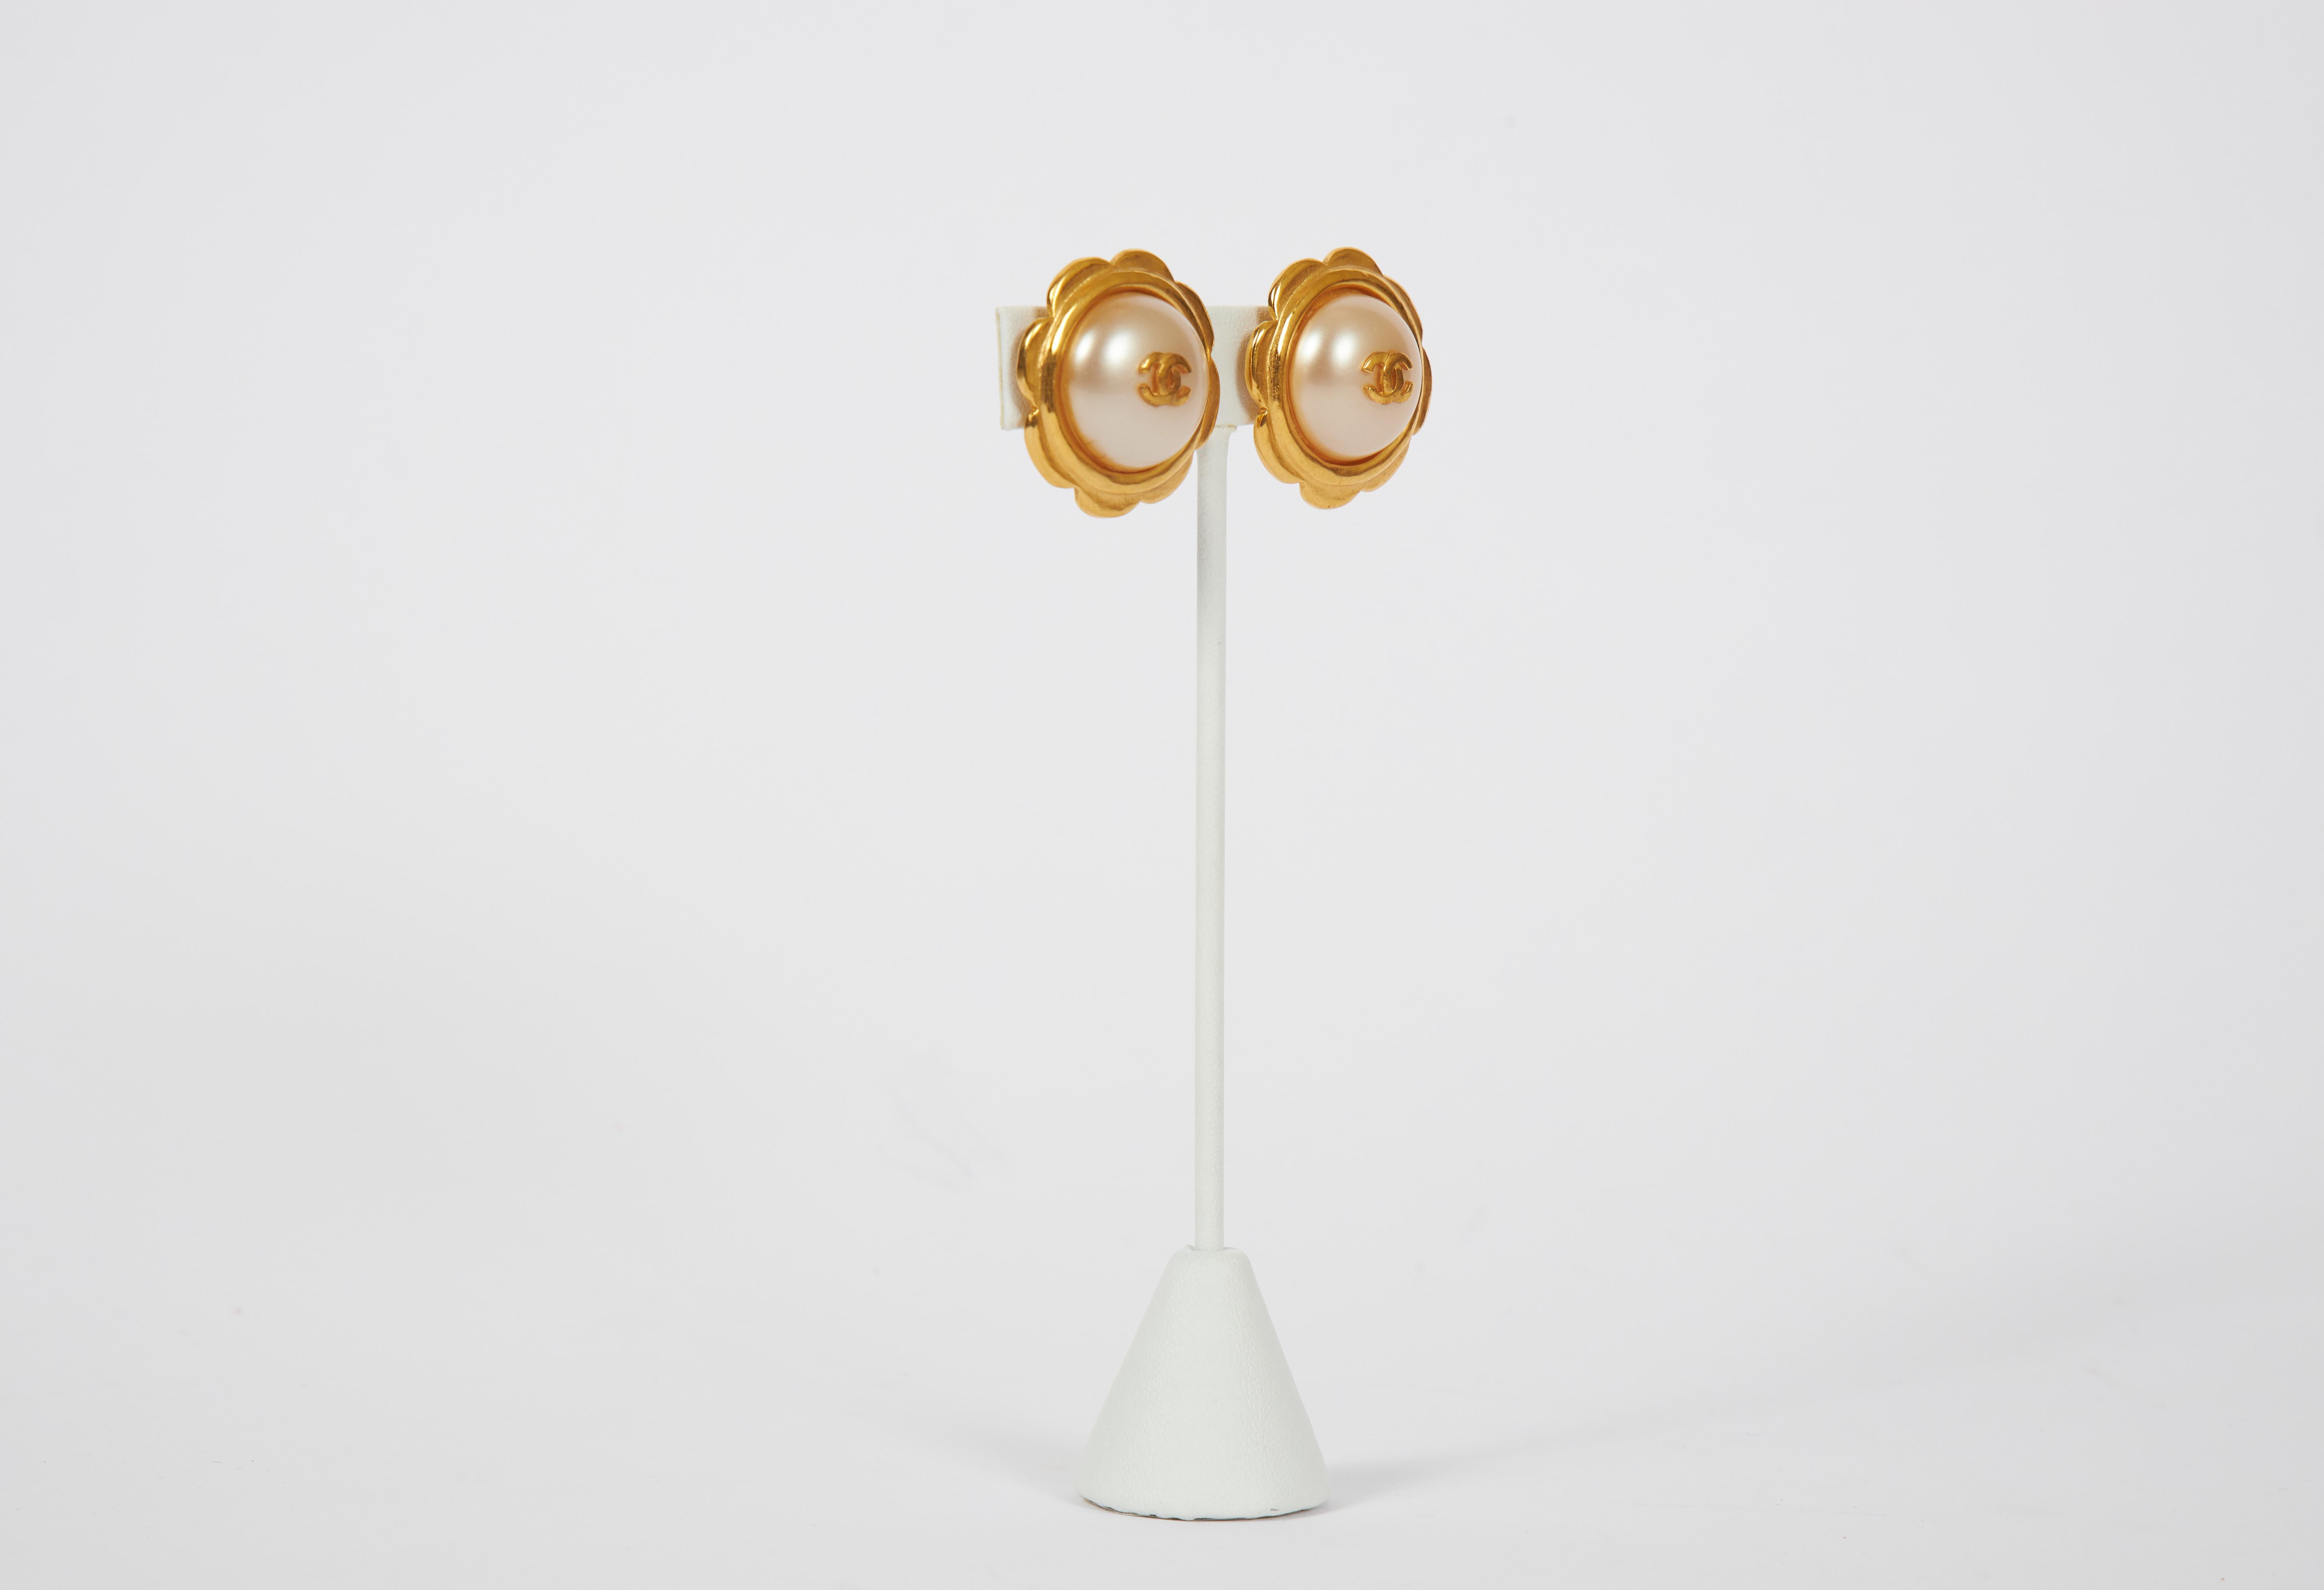 Chanel faux-pearl earrings with goldtone metal flower-form settings. Clip backs. Spring '97. Original box included.